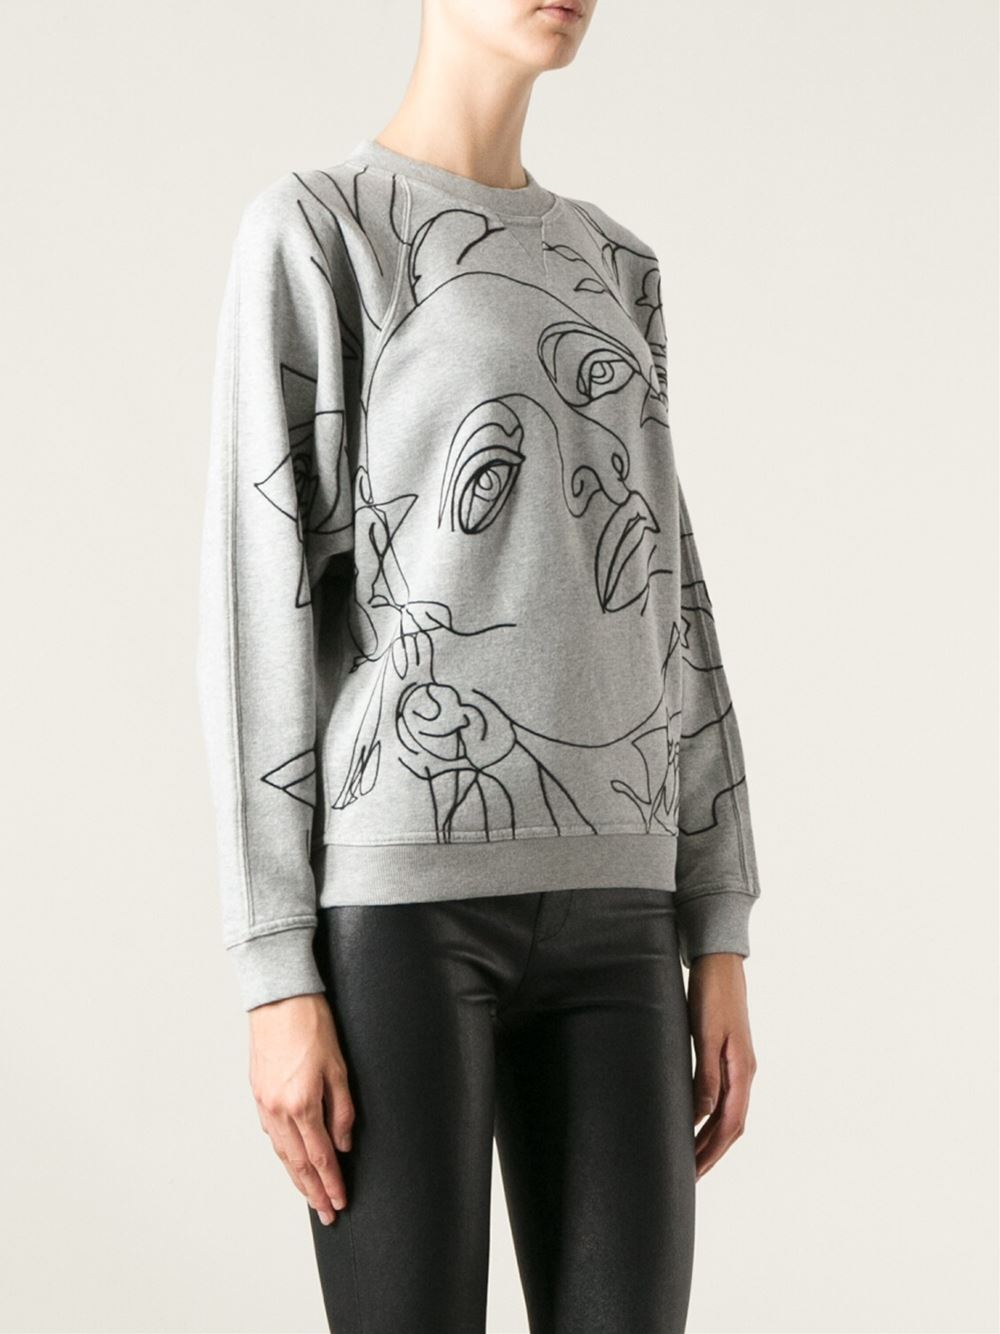 Jean Paul Gaultier Embroidered Face Sweatshirt in Gray - Lyst